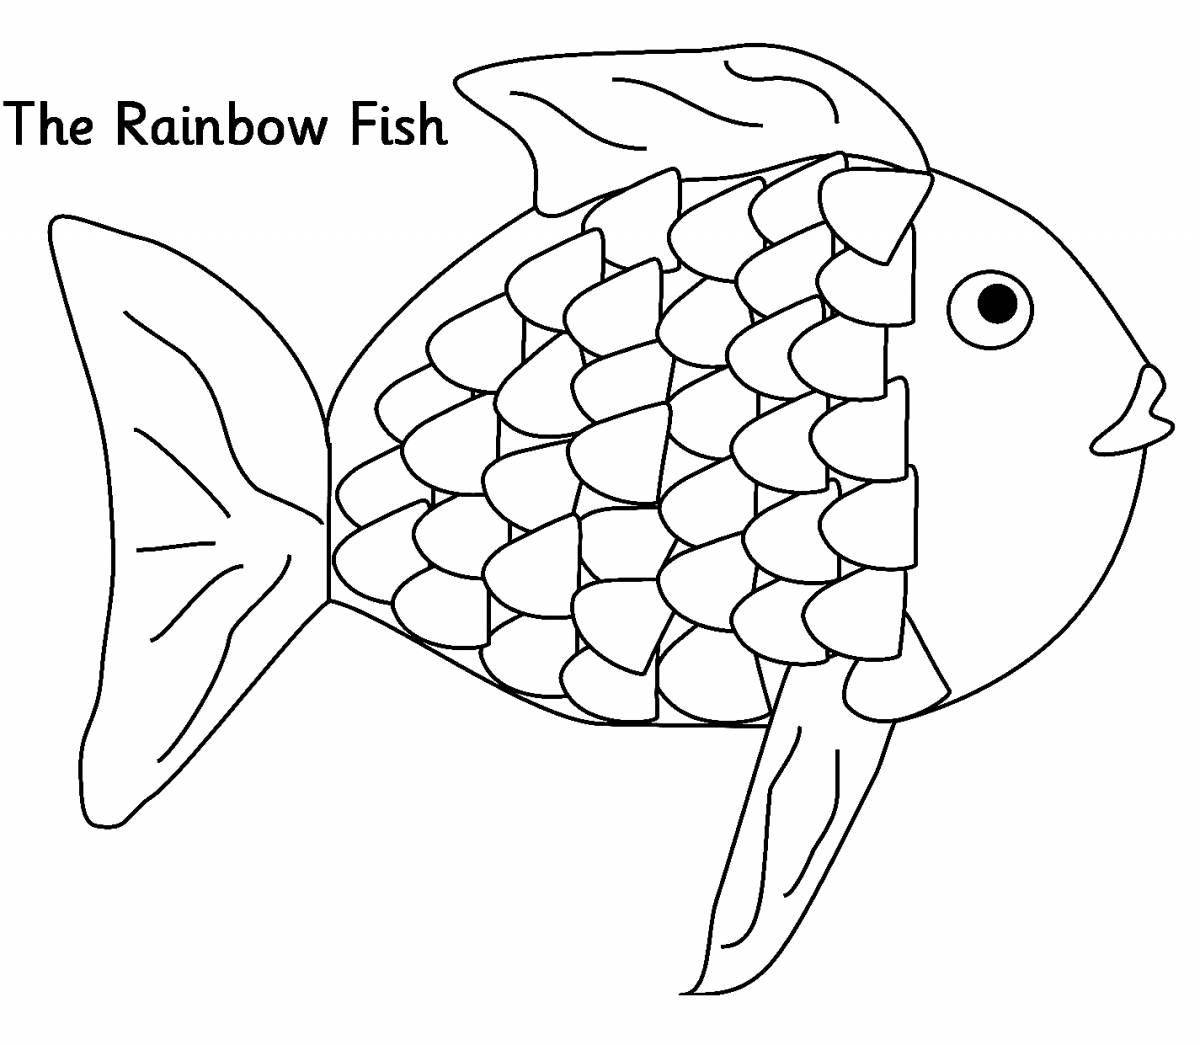 Fun coloring of the fish structure